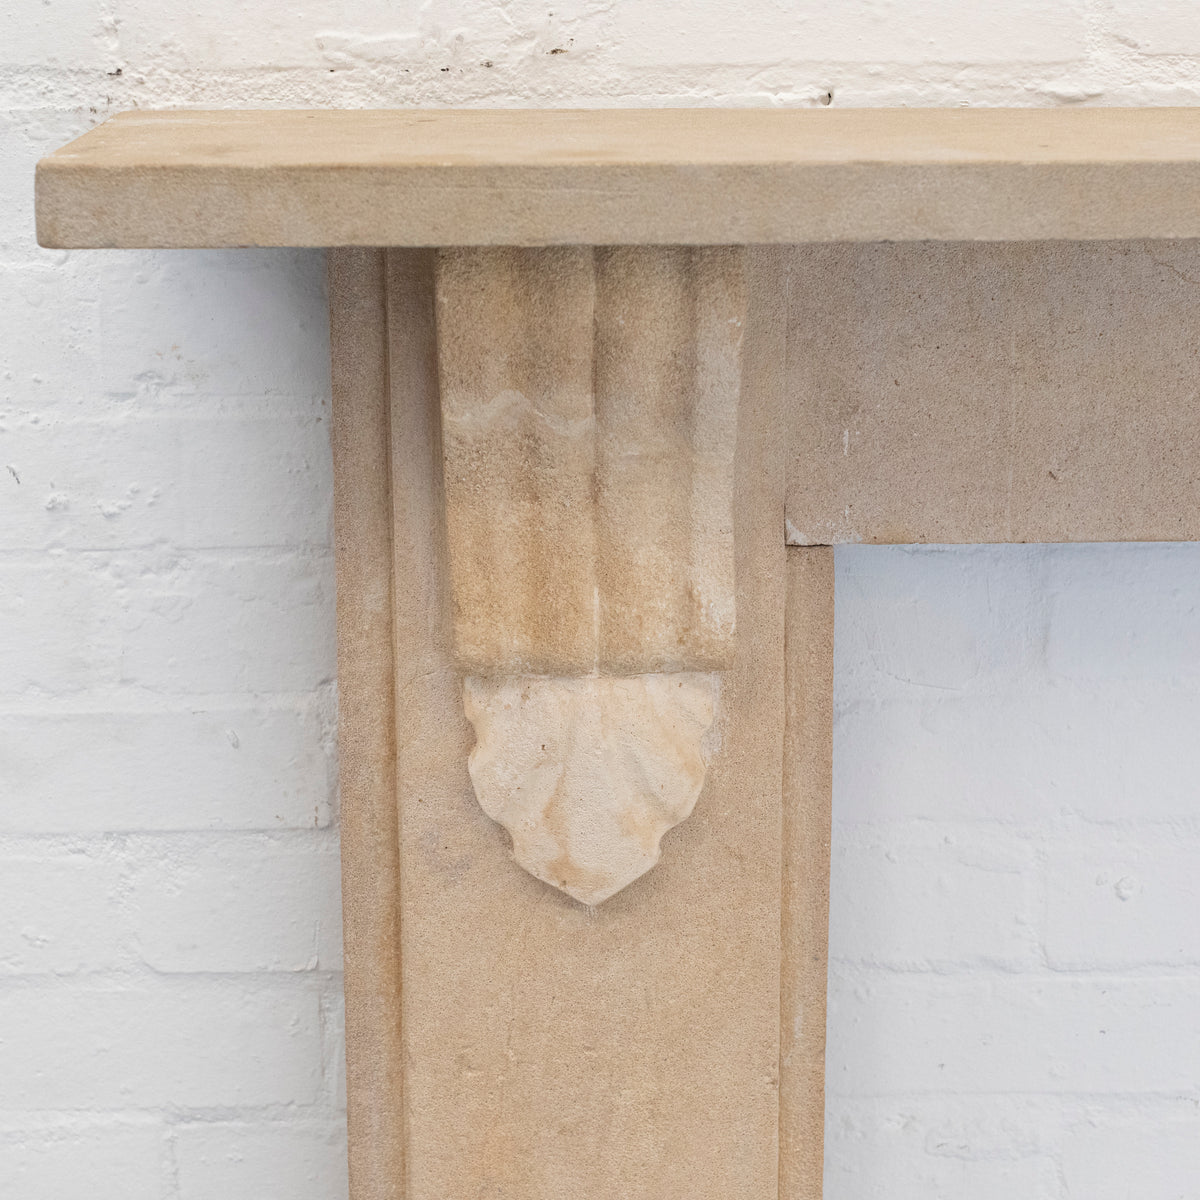 Antique Victorian Bath Stone Surround with Carved Corbels | The Architectural Forum